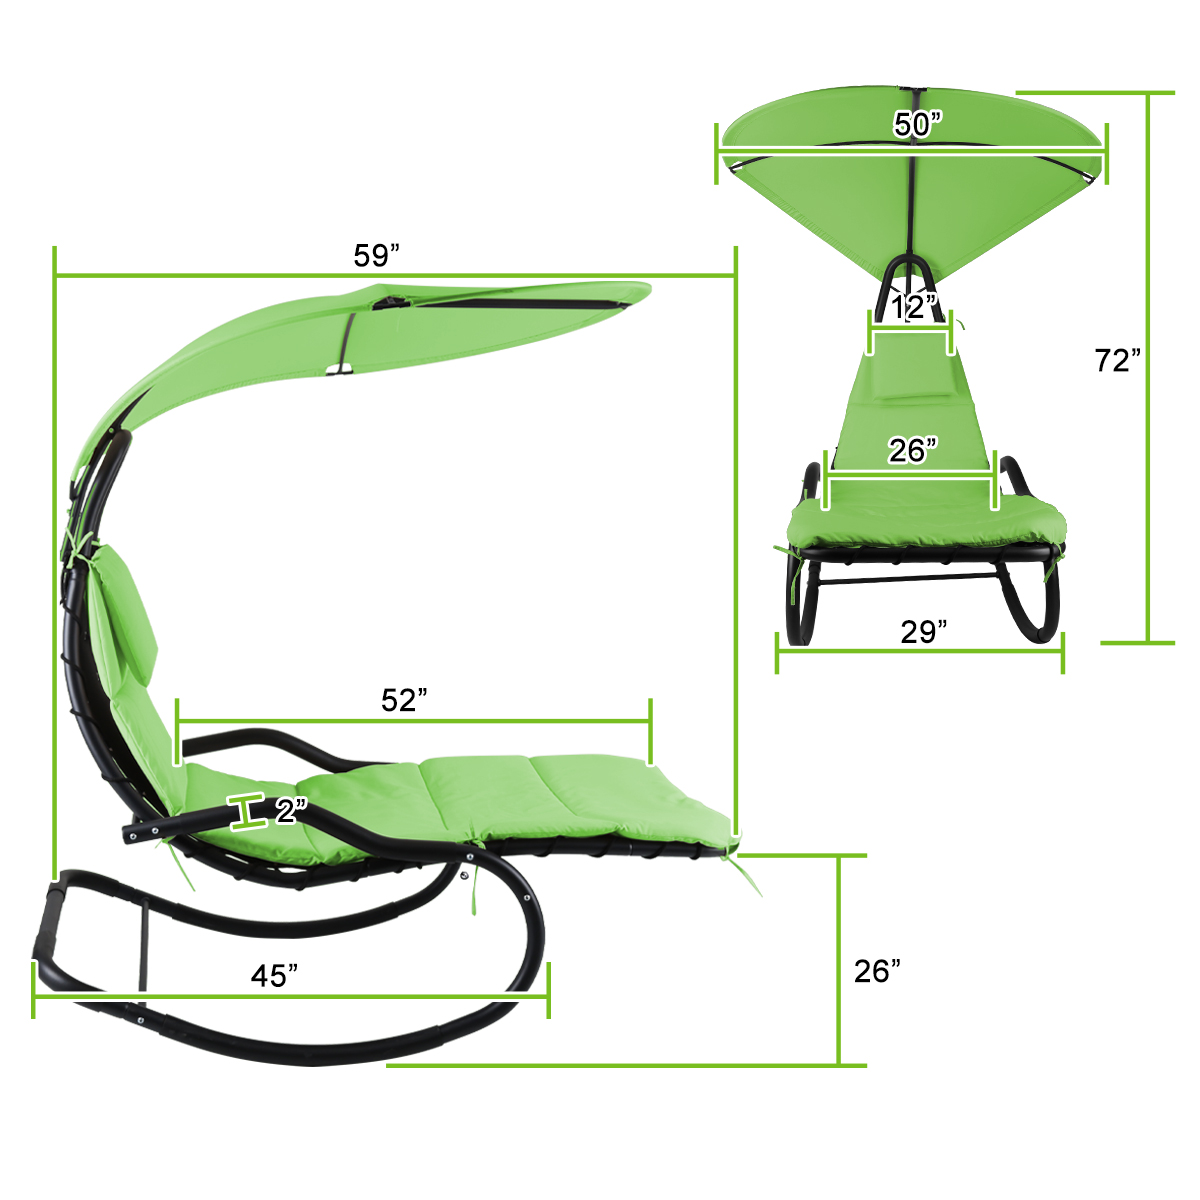 Rocking Hanging Lounge Chair - Curved Chaise Rocking Lounge Chair Swing For Backyard Patio w/ Built-in Pillow Removable Canopy with stand {Green} - image 4 of 8